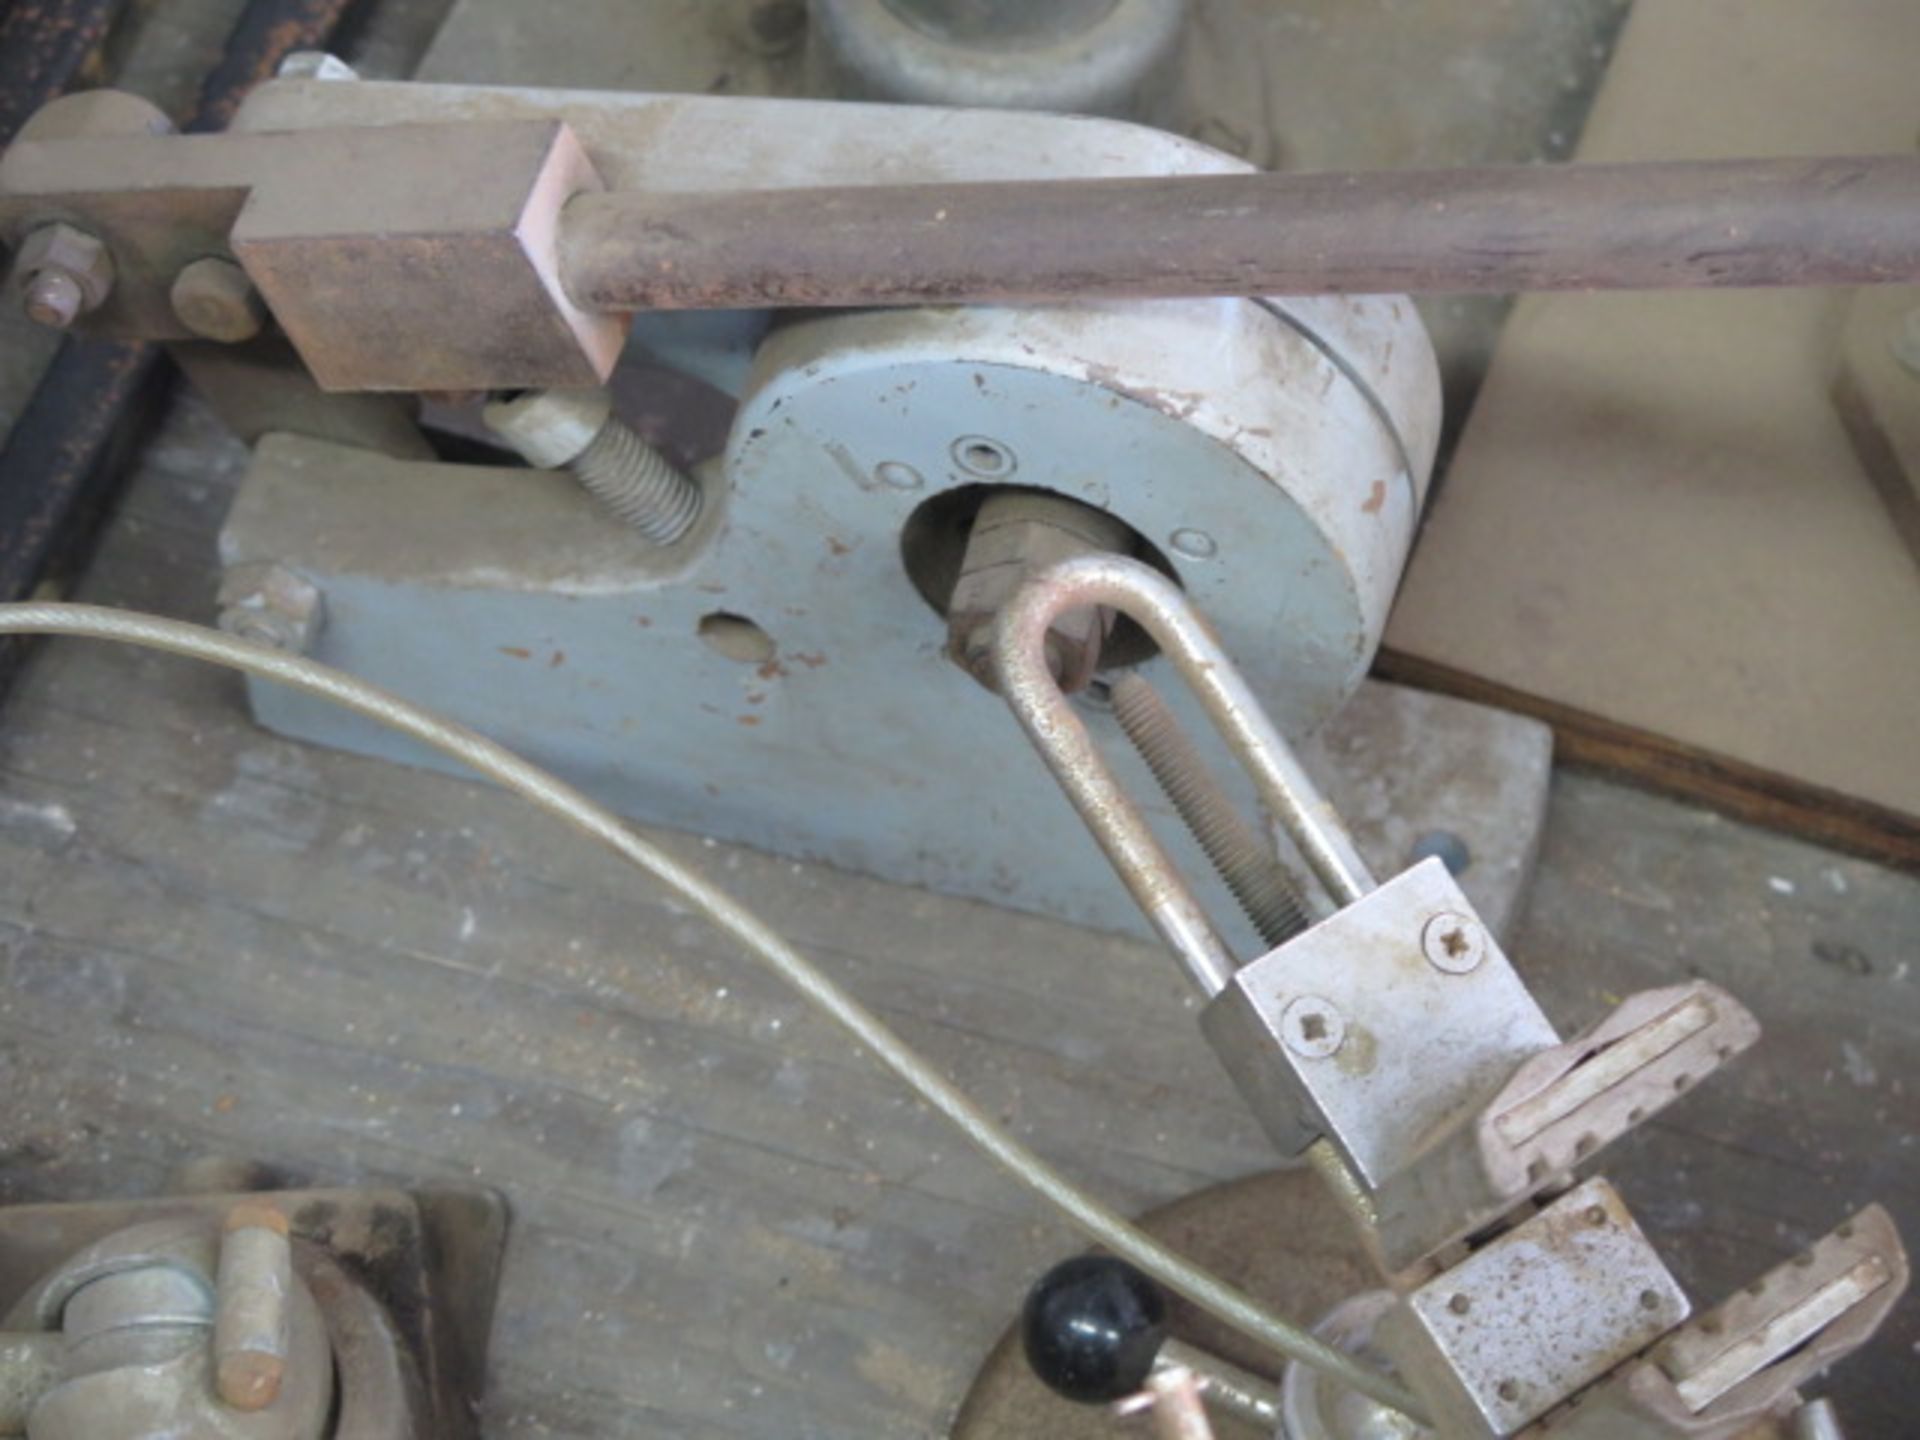 Misc Punches, Shears, benders, Tool Box, Grinding Wheels amd Misc (1-Pallet), SOLD AS IS - Image 2 of 7